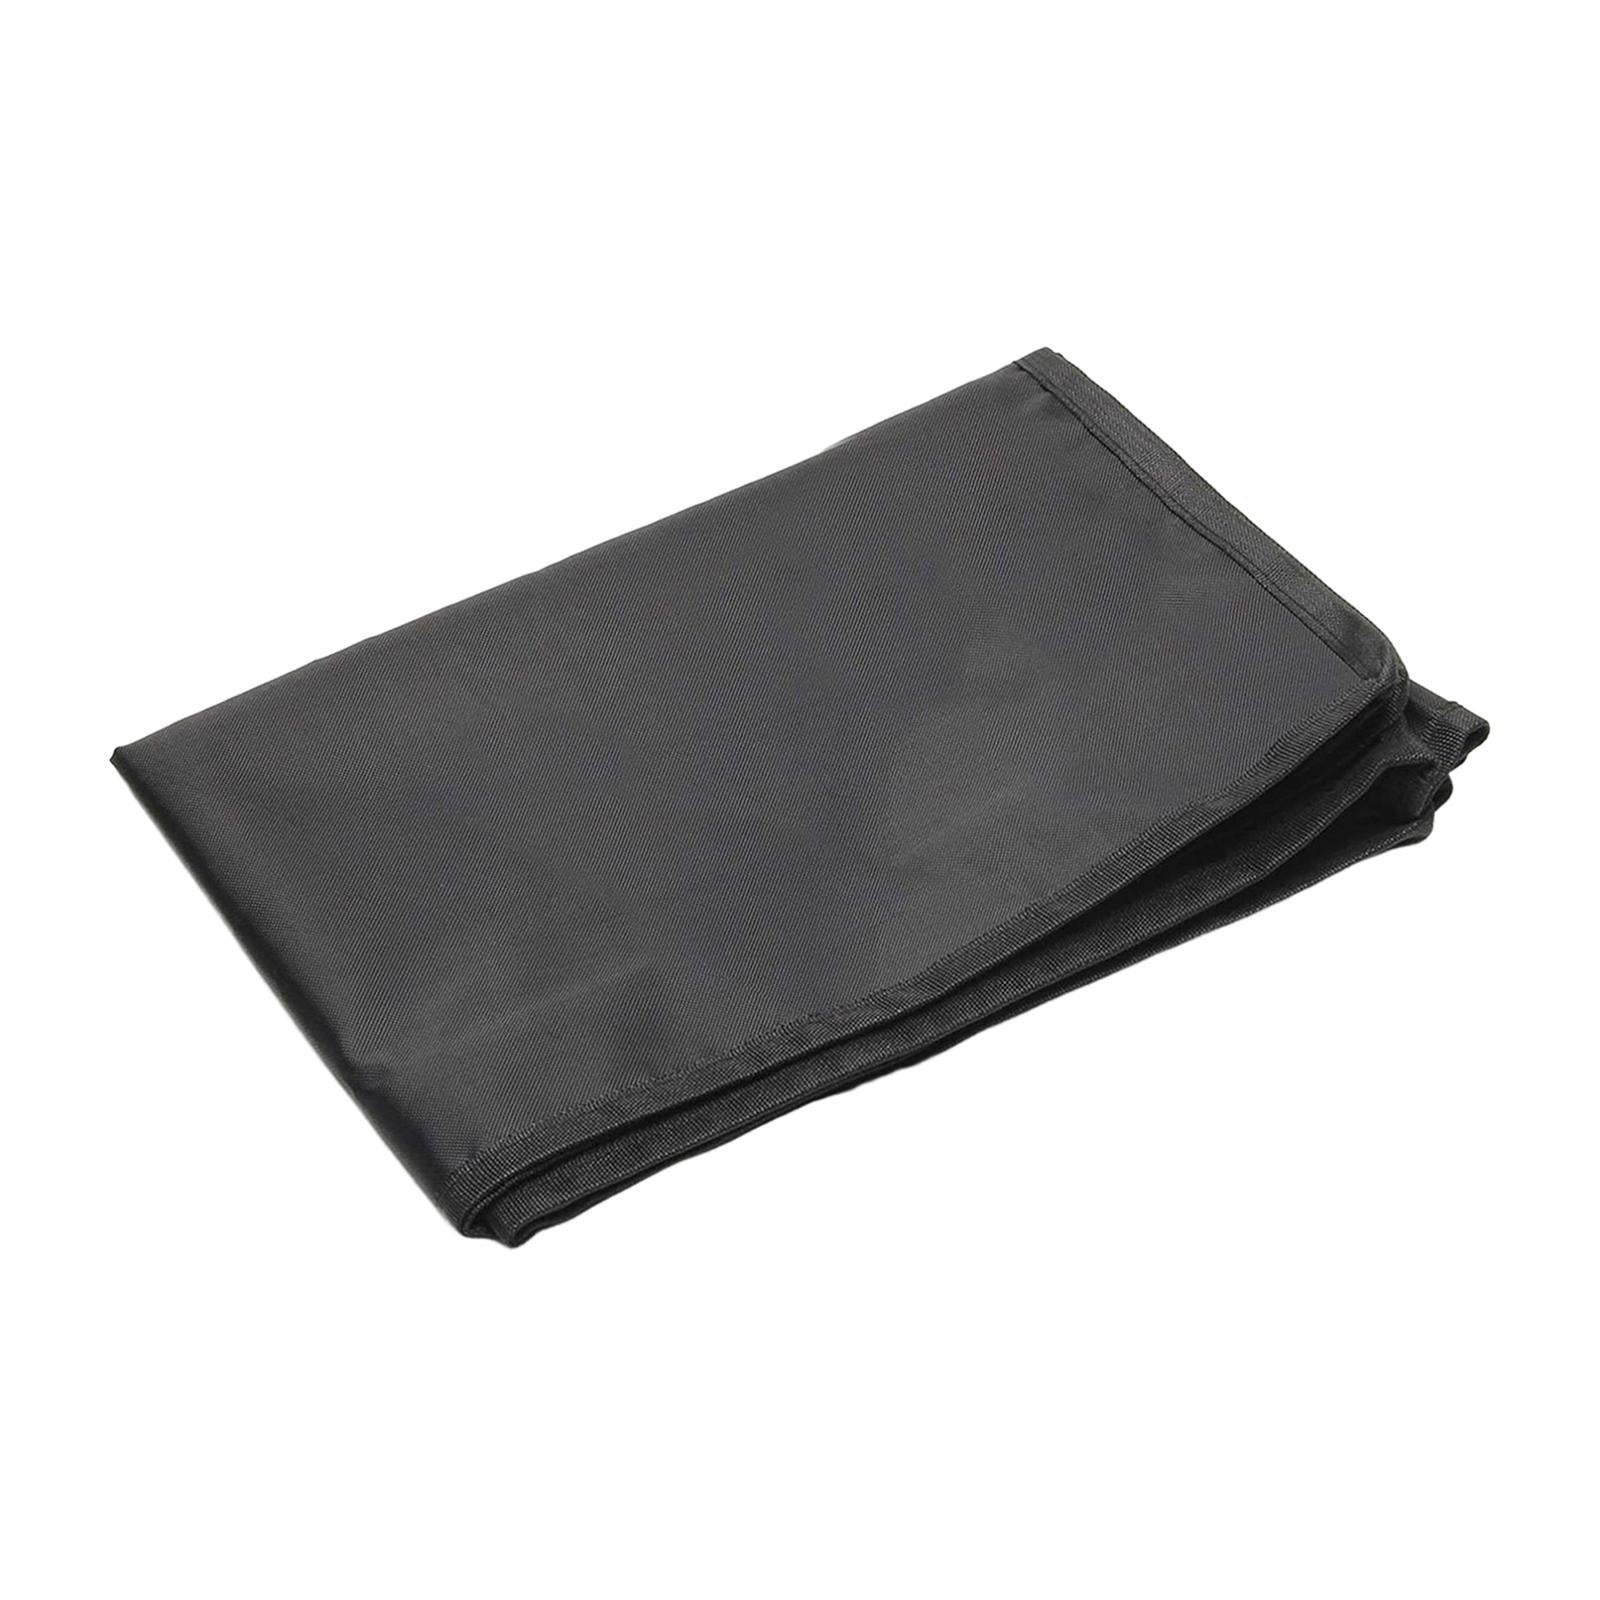 Computer Monitor Dust Cover Accs Computer Screen Protective Sleeve for Hotel 71cmx46cmx10cm